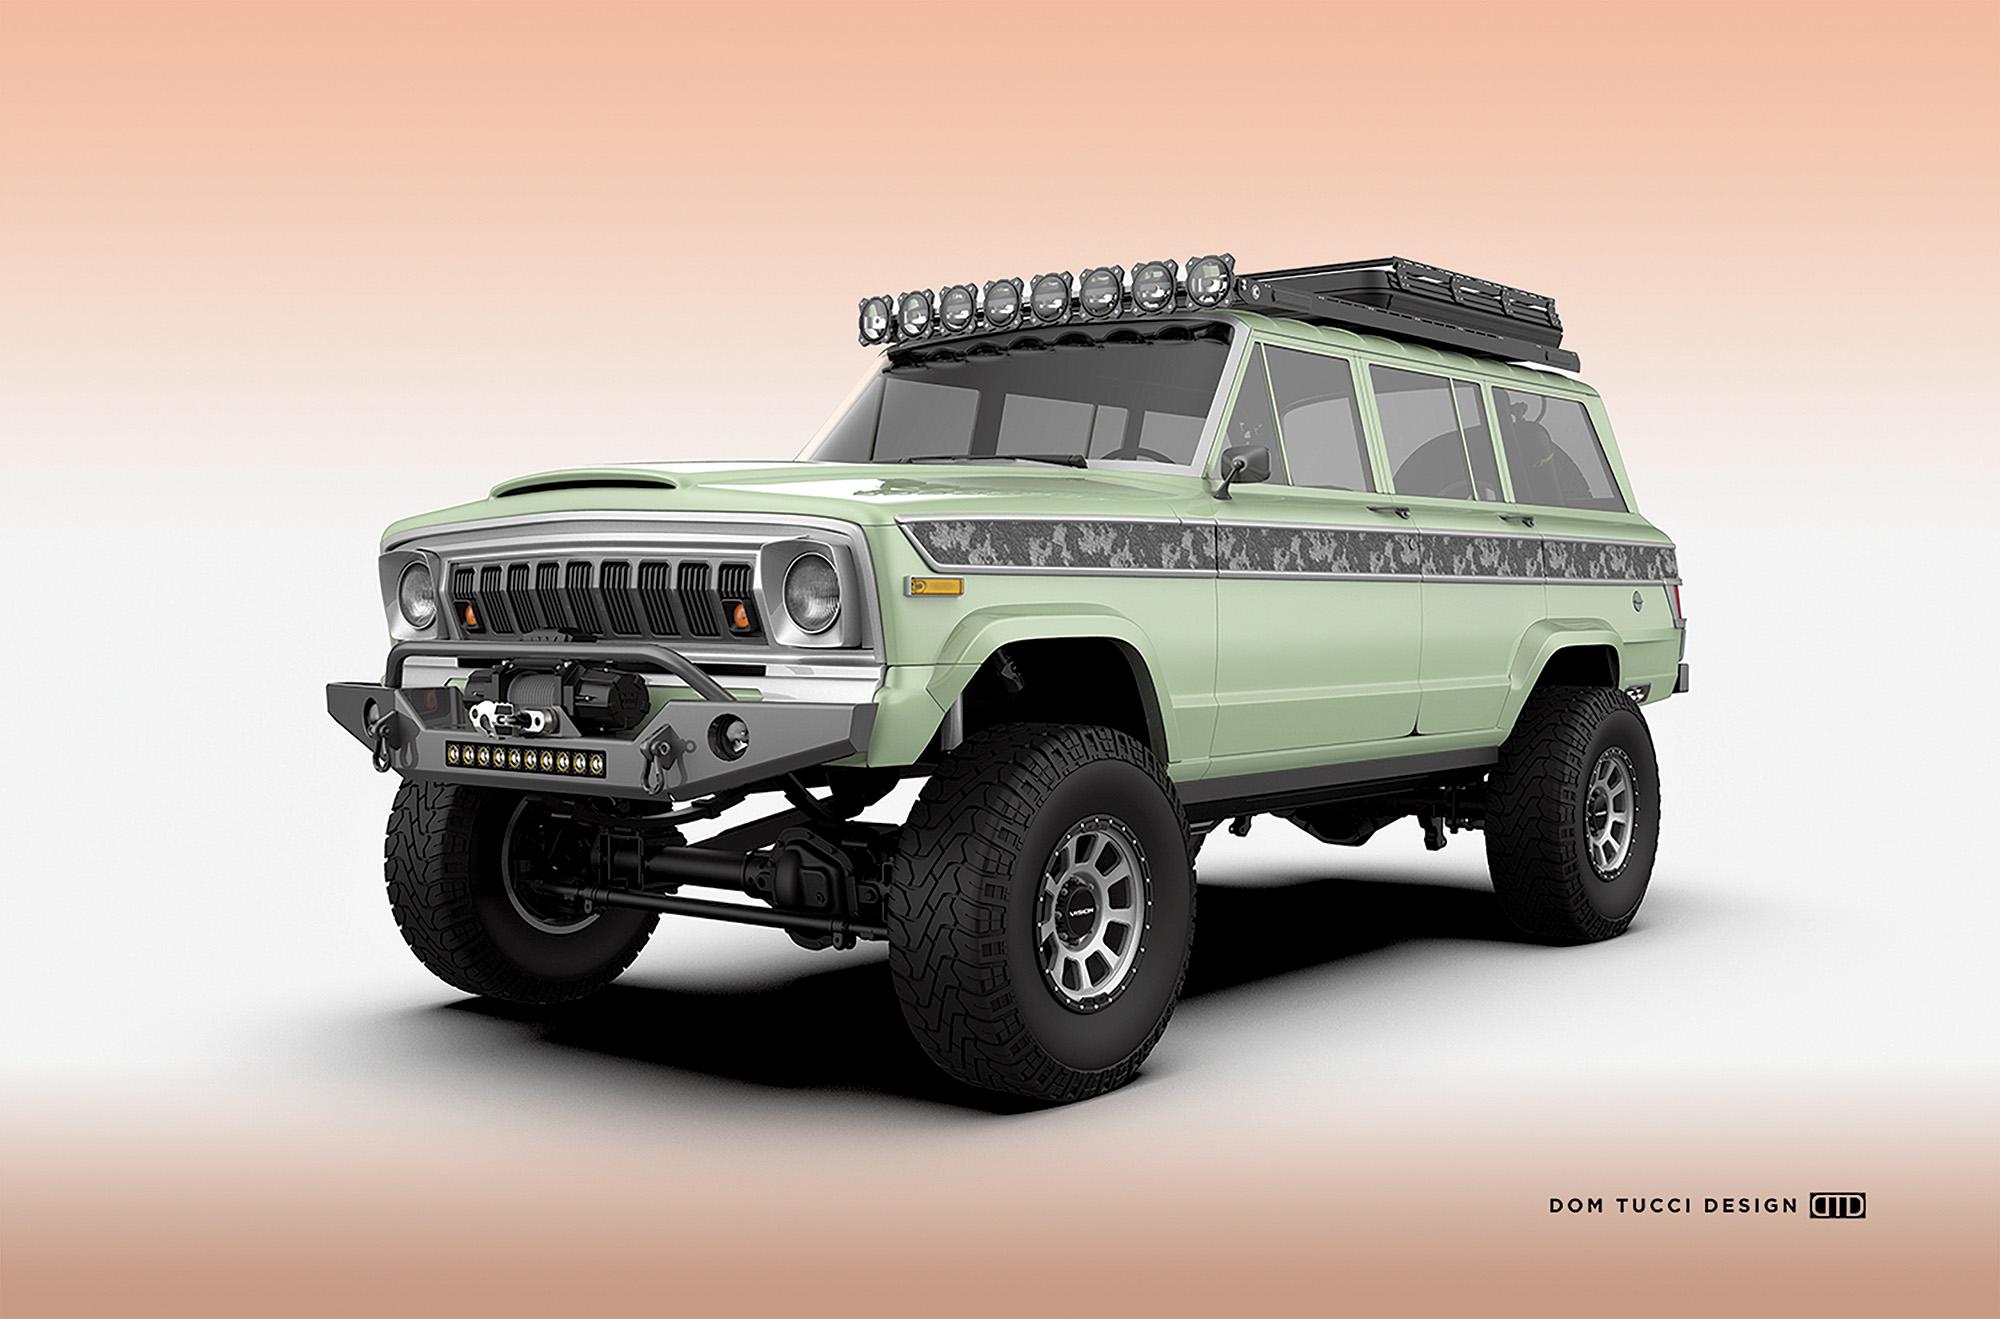 Project Sasquatch, a 392 Hemi-powered 1979 Jeep Wagoneer overlanding build, to debut at SEMA